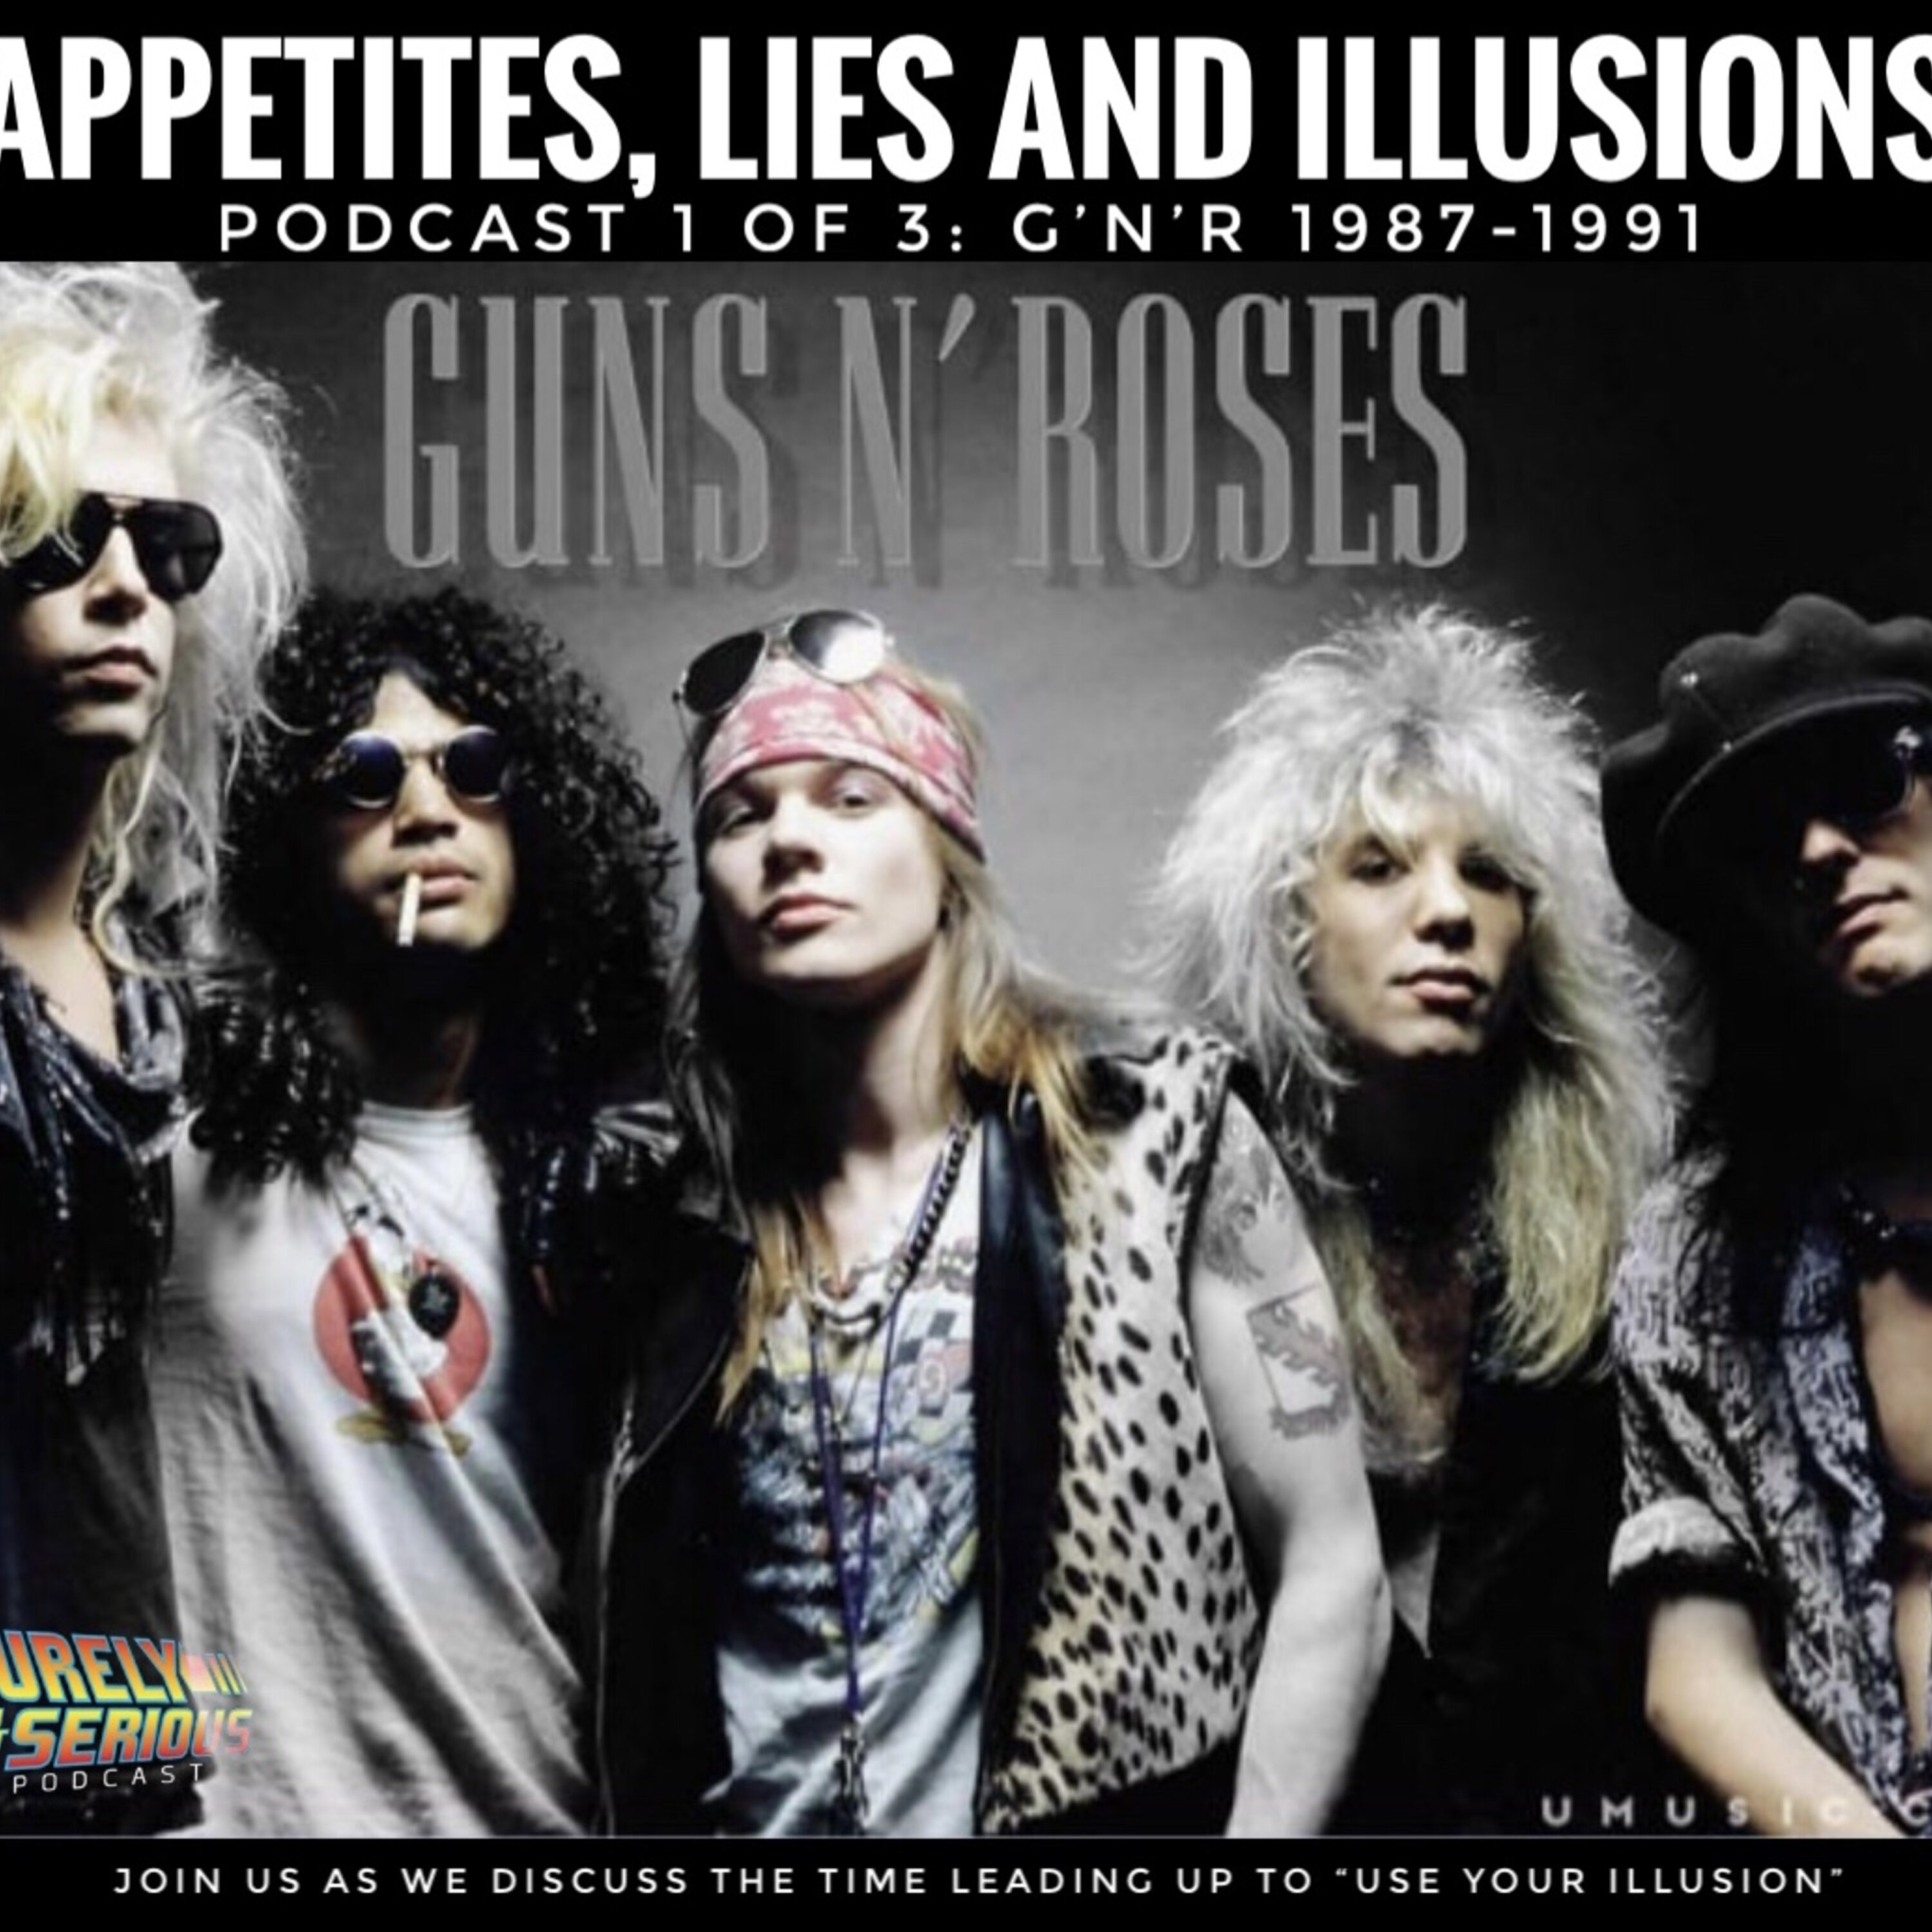 Guns N' Roses 1987-1991:  Appetites, Lies and Illusions